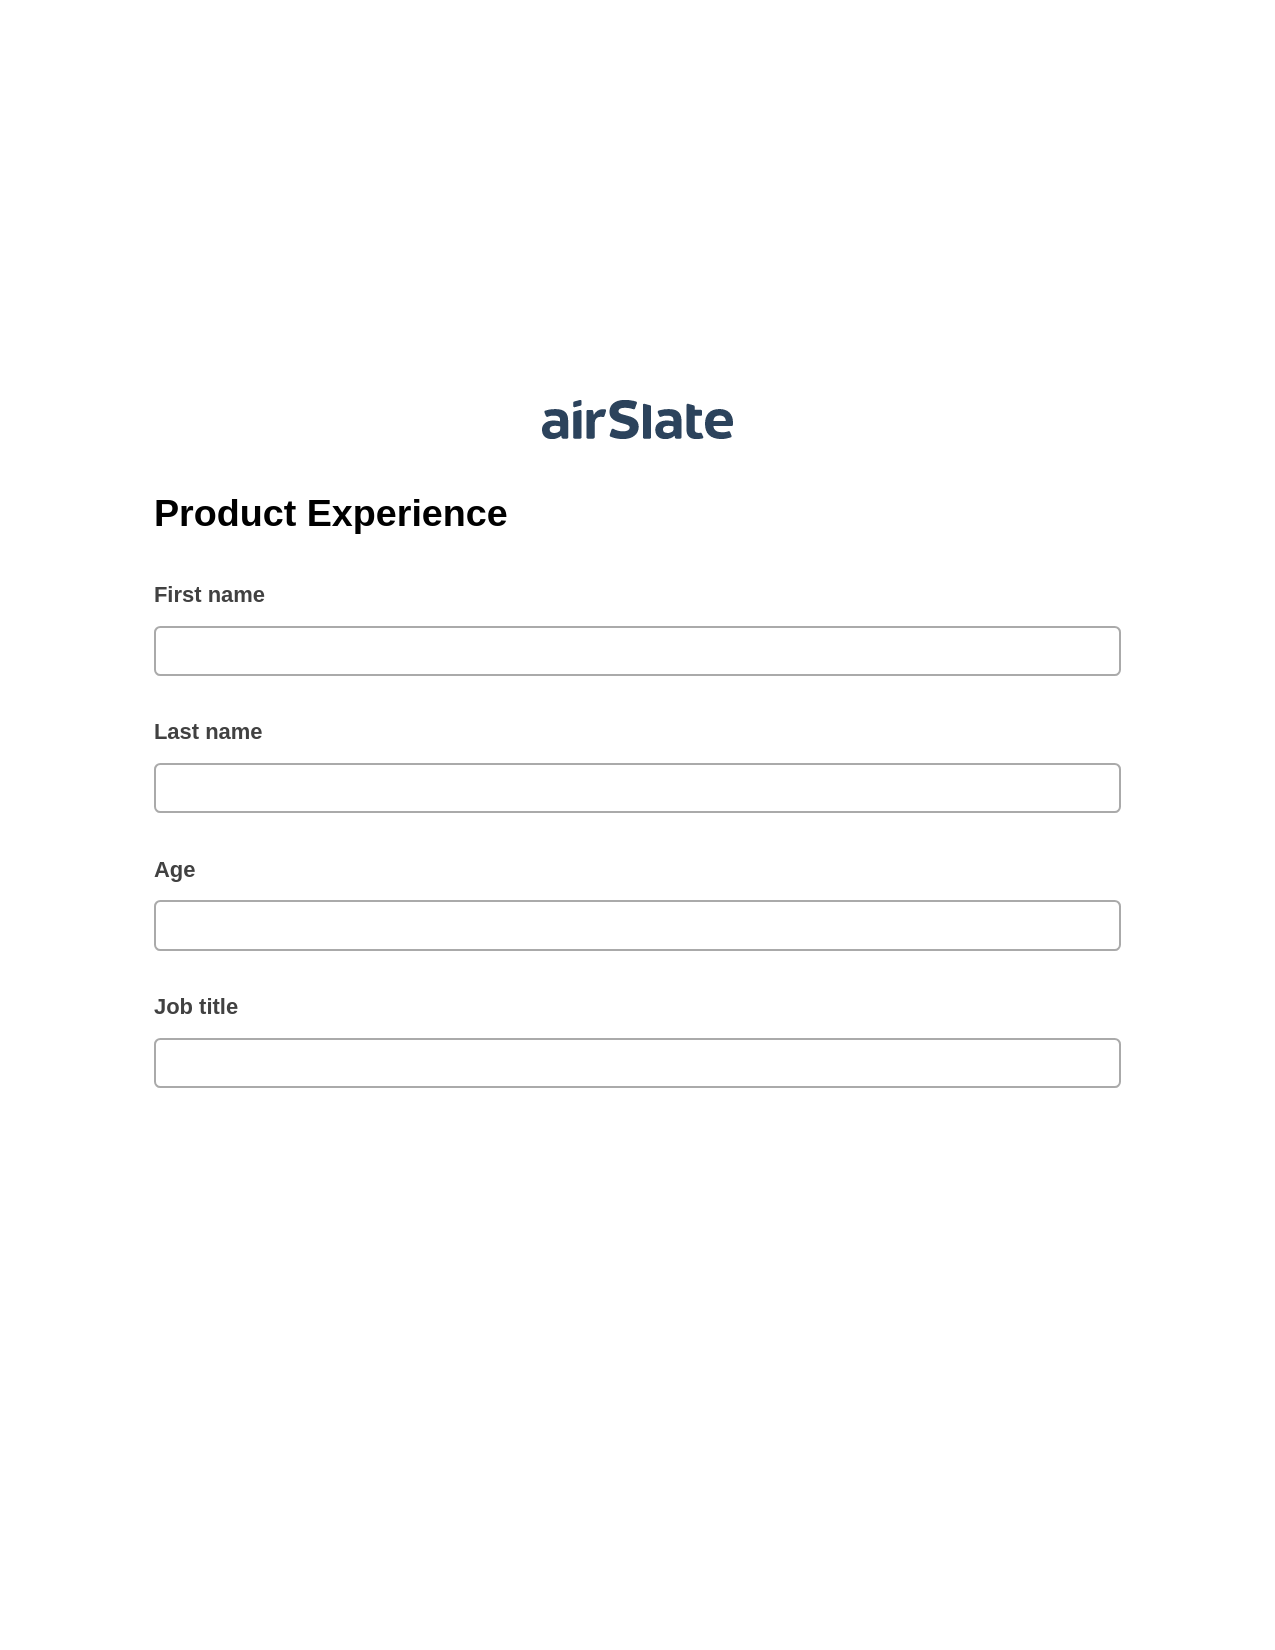 Product Experience Pre-fill Dropdowns from Google Sheet Bot, Update MS Dynamics 365 Record Bot, Export to Excel 365 Bot